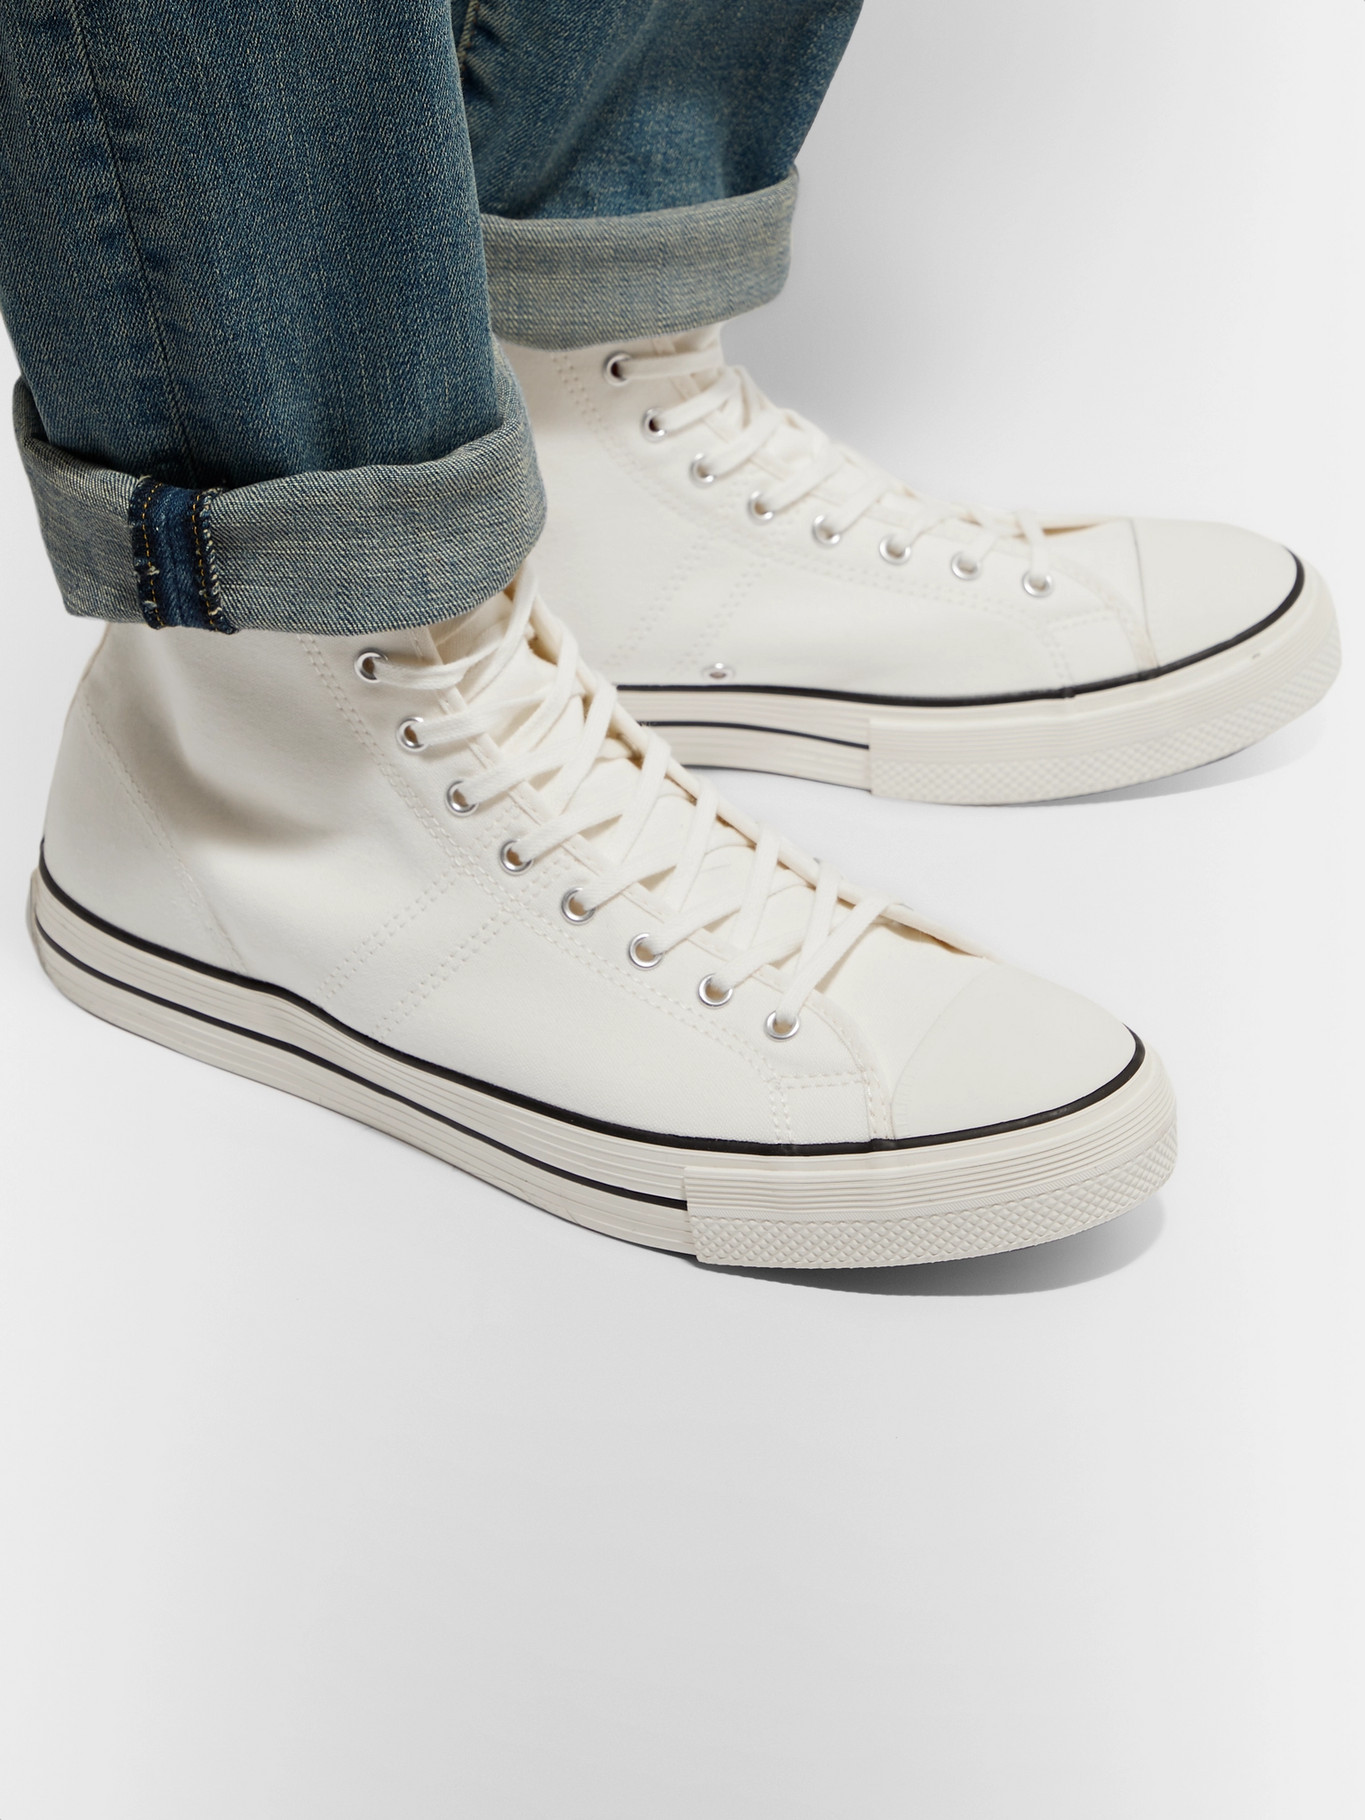 converse lucky star review